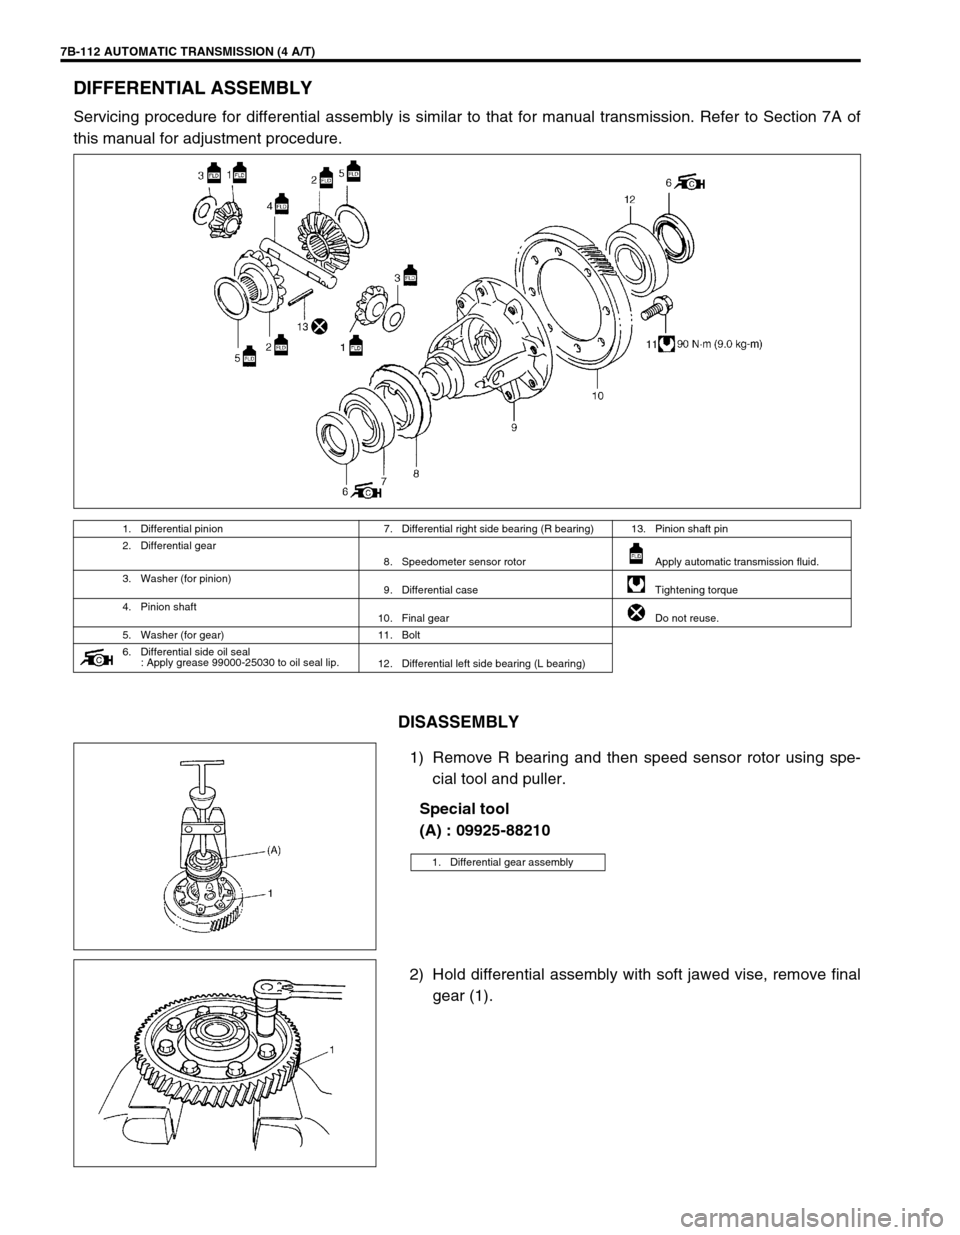 SUZUKI SWIFT 2000 1.G Transmission Service Workshop Manual 7B-112 AUTOMATIC TRANSMISSION (4 A/T)
DIFFERENTIAL ASSEMBLY
Servicing procedure for differential assembly is similar to that for manual transmission. Refer to Section 7A of
this manual for adjustment 